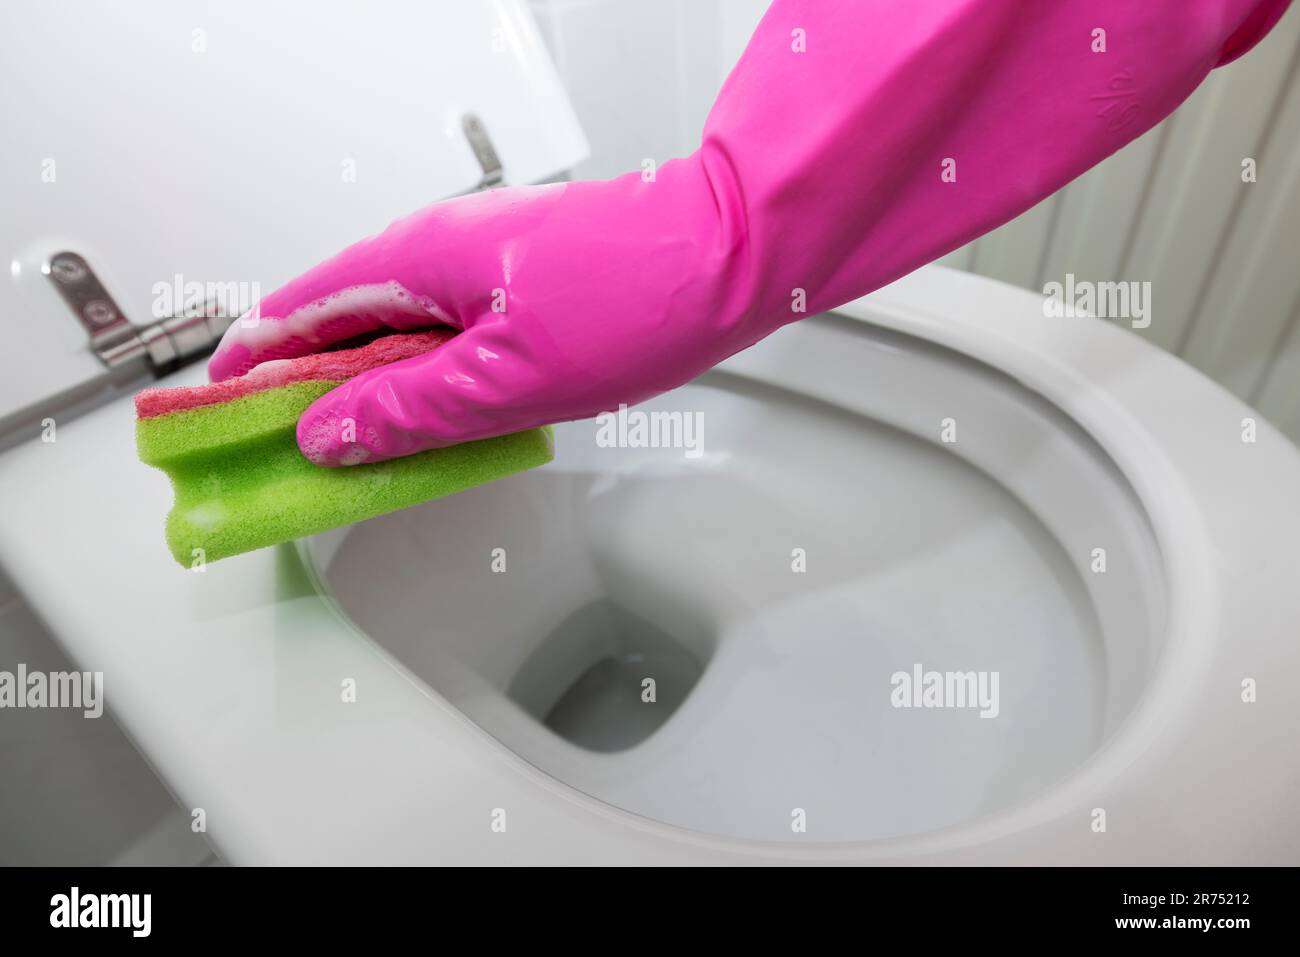 Clean toilet, clean toilet seat with cleaning sponge, detail, Stock Photo